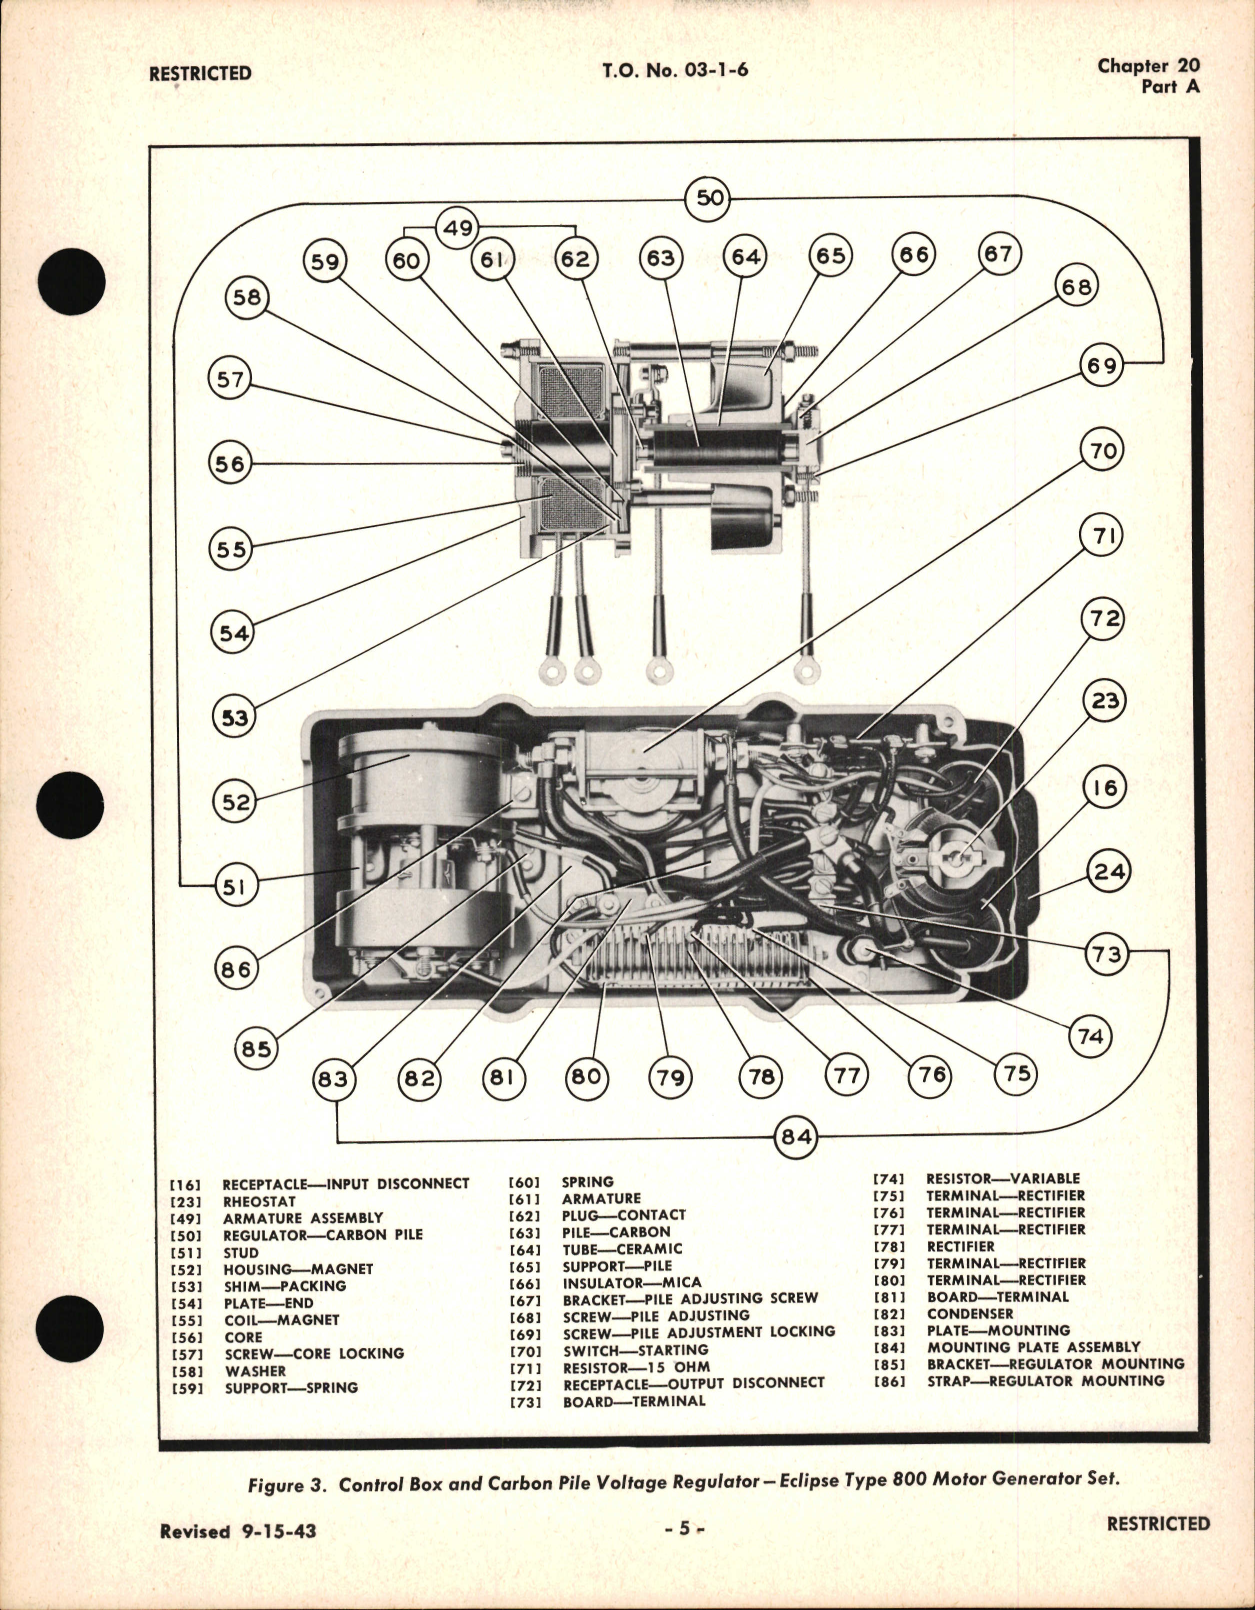 Sample page 5 from AirCorps Library document: Operating and Service Instructions for Type 800 Motor Generator